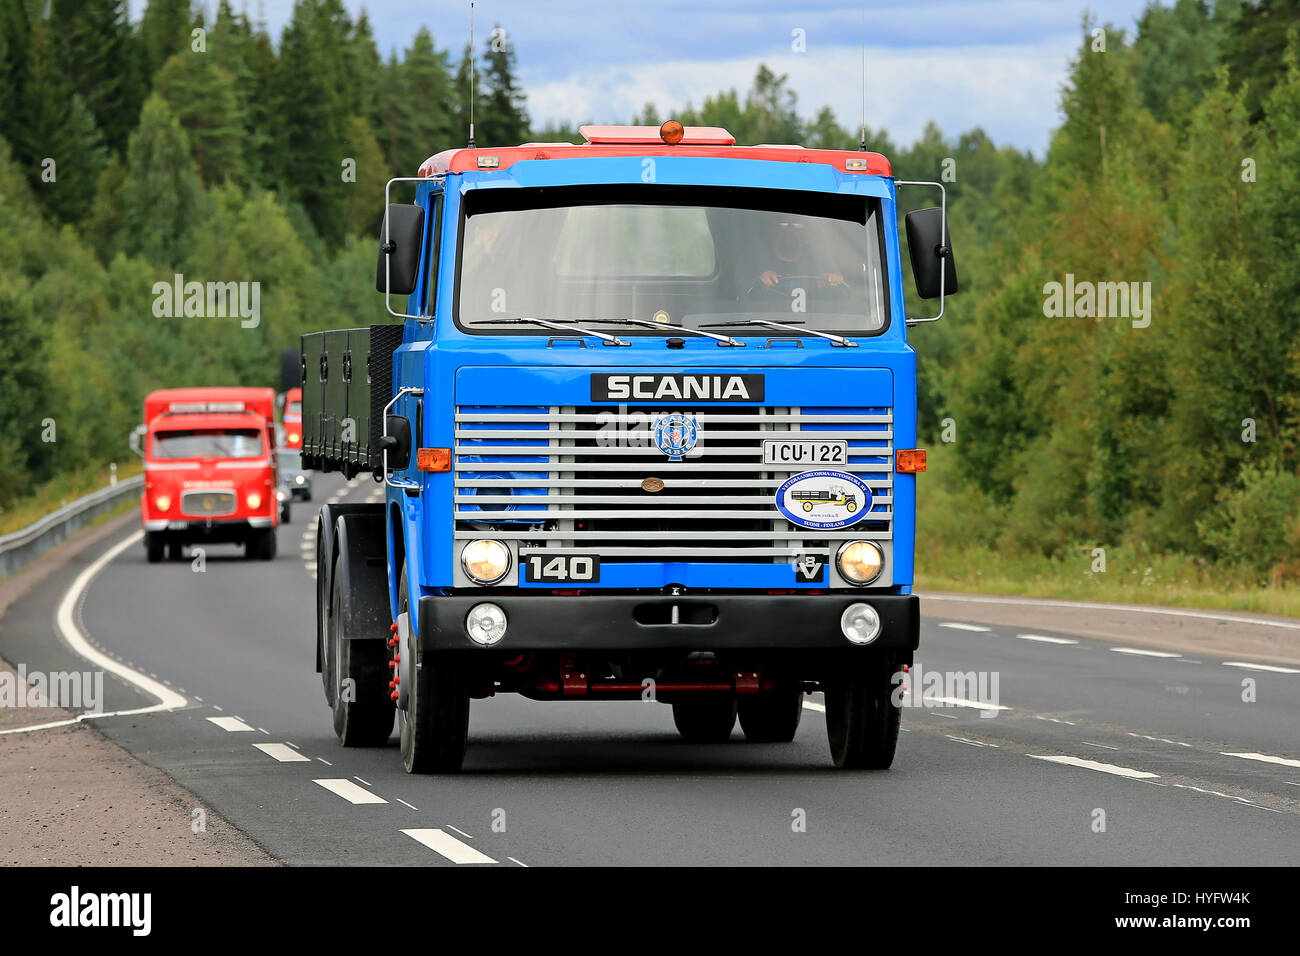 JALASJARVI, FINLAND - AUGUST 14, 2017: Blue Scania 140 V8 tipper truck on the road with another classic Scania on the background. The 140 was manufact Stock Photo